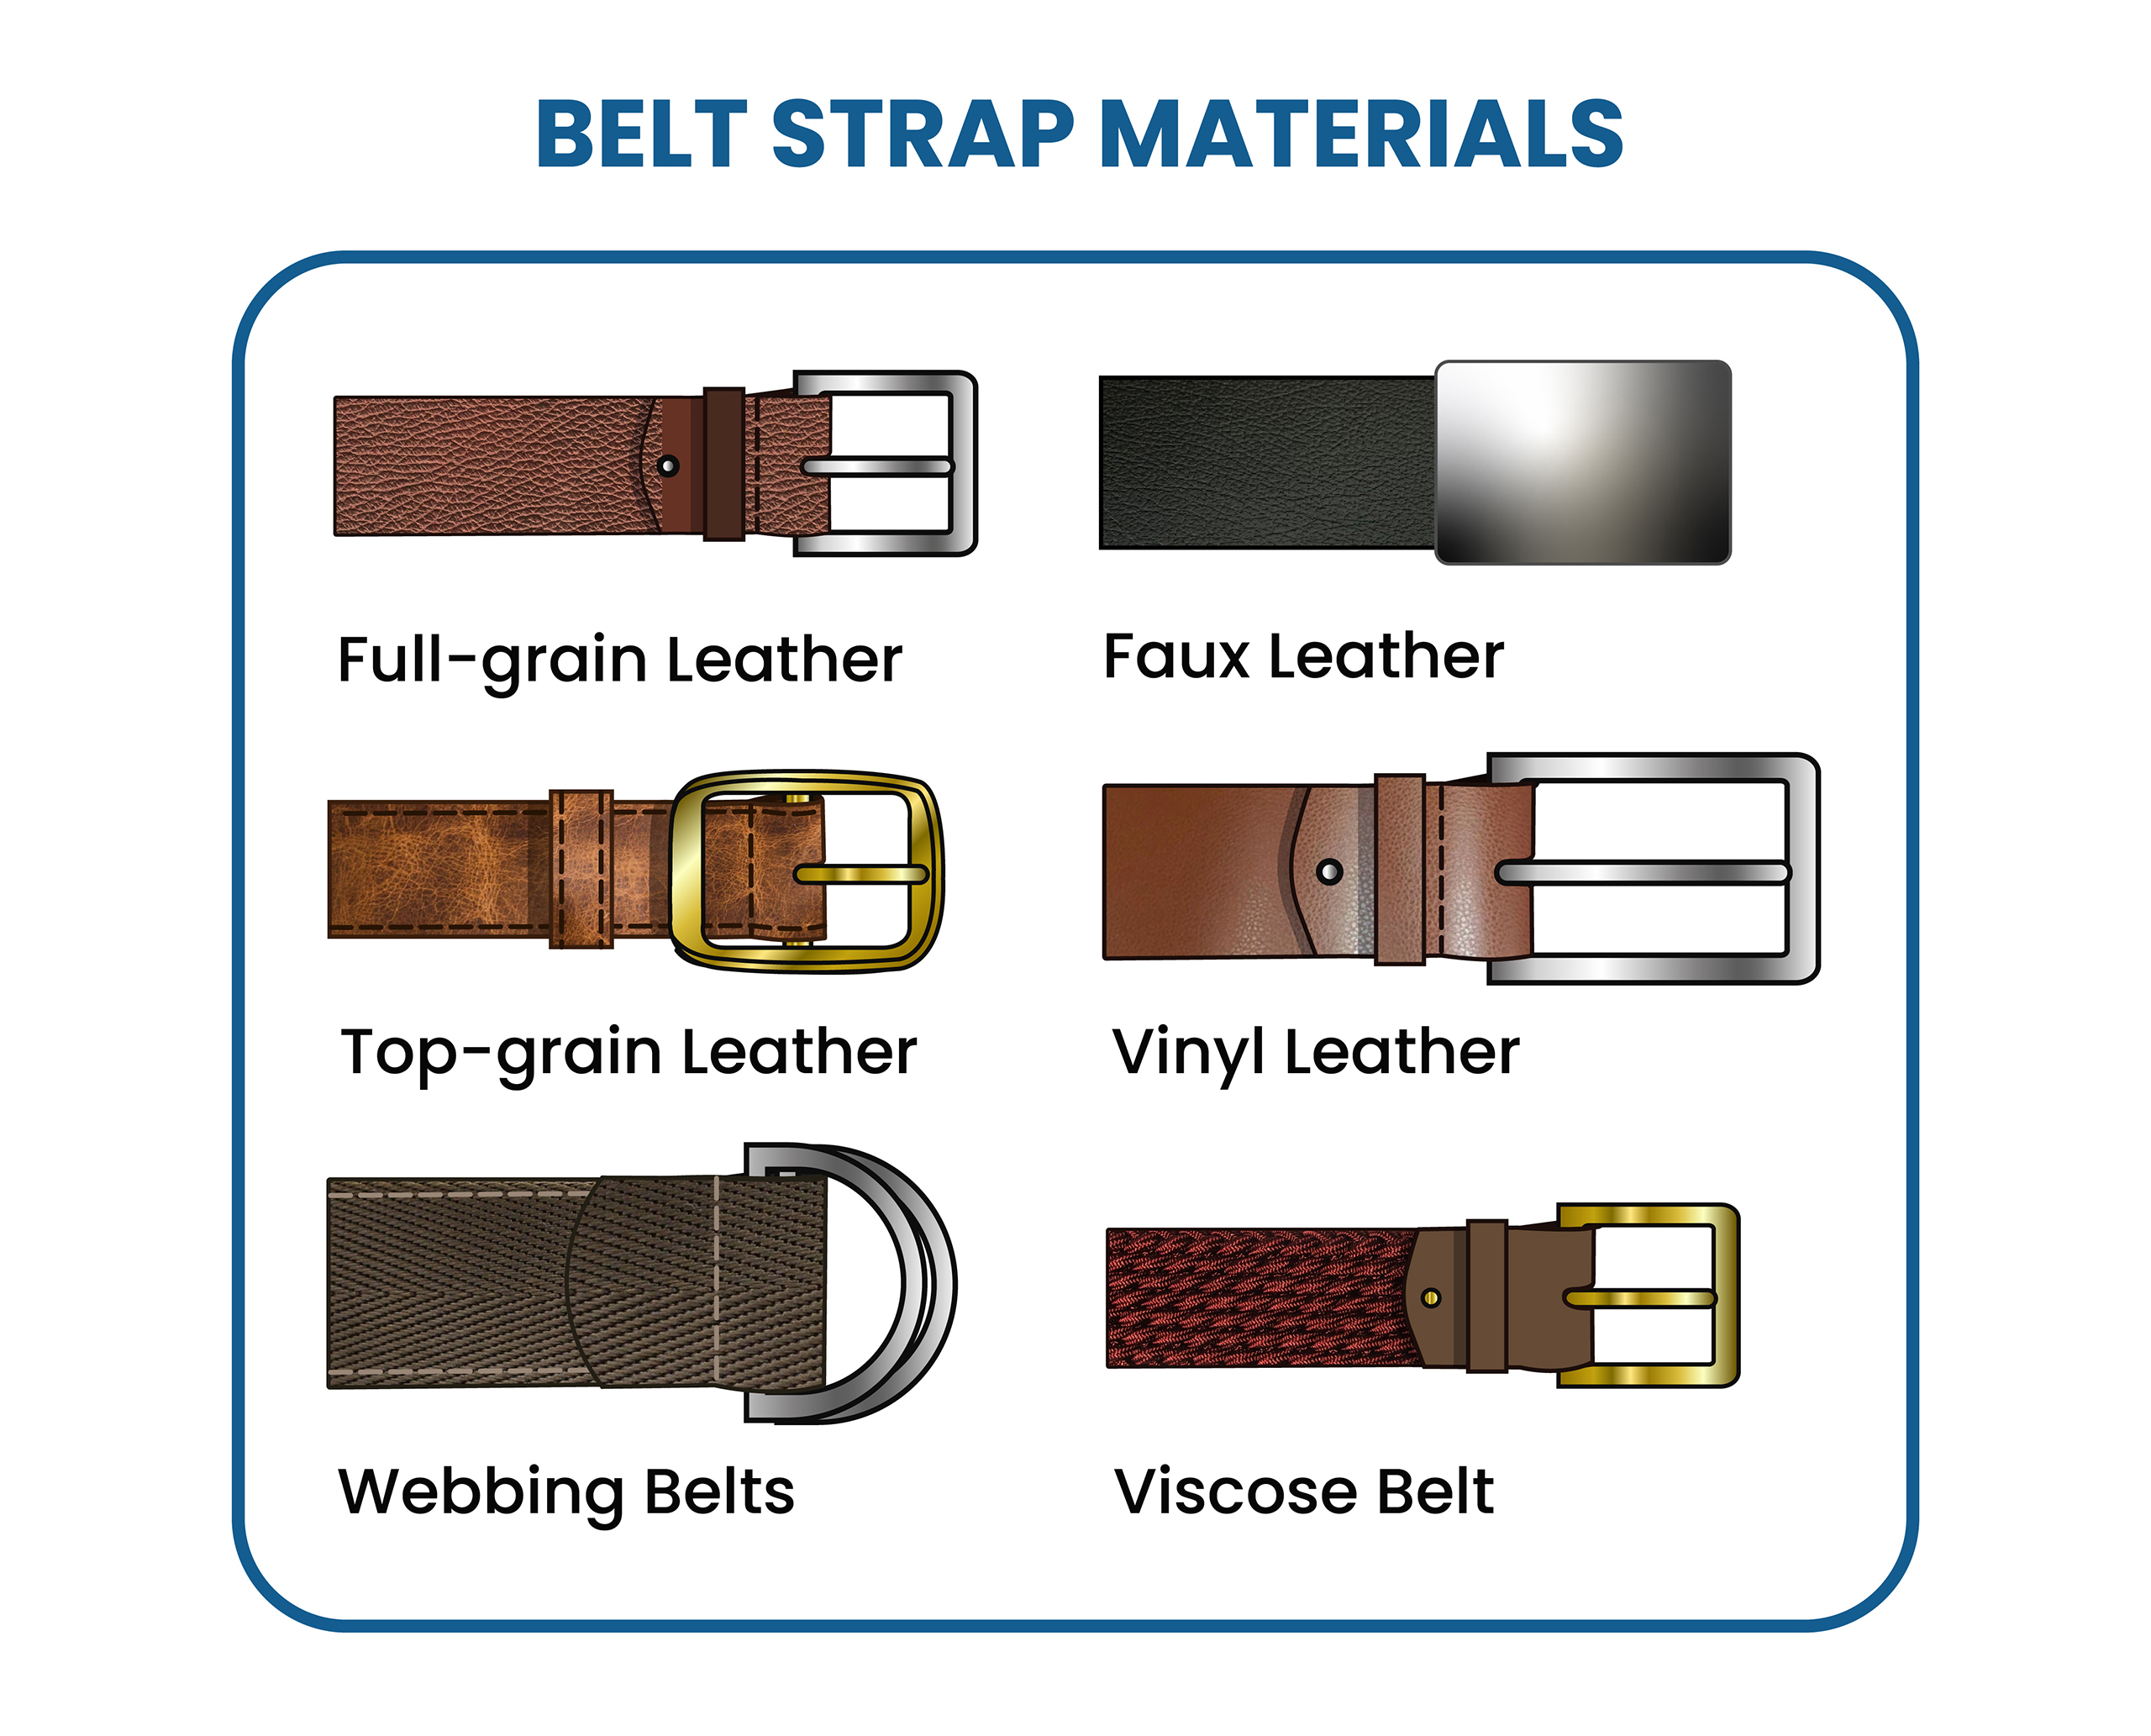 How to Wear a Belt & Which One to Choose – Suits Expert